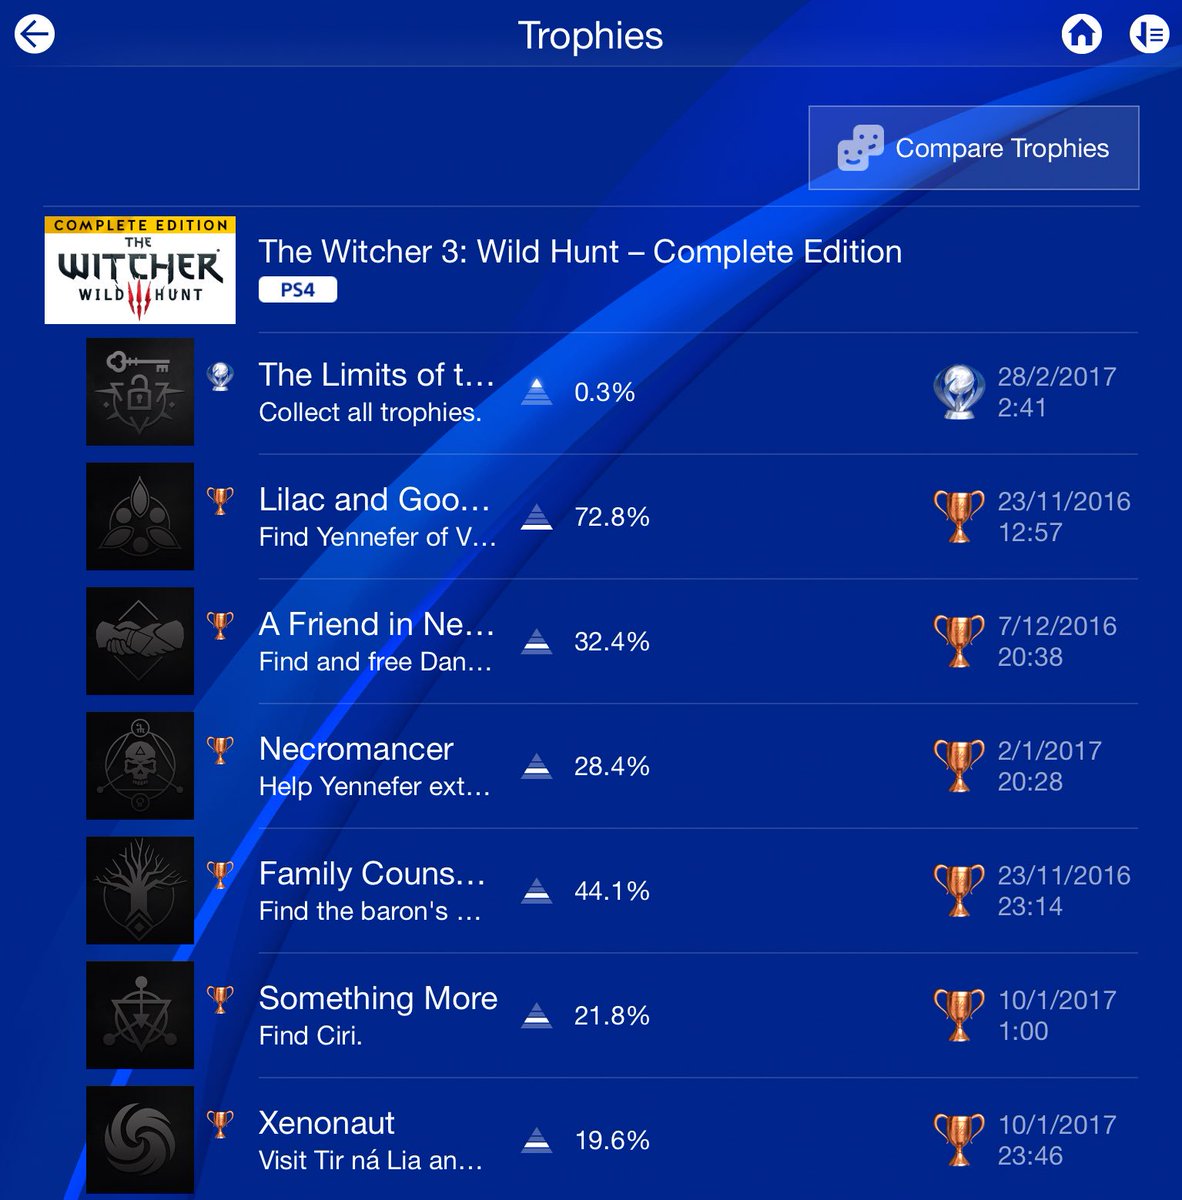 Klair88 on Twitter: "I've just earned my 10,000th PSN &amp; it was final Witcher 3 platinum trophy Very proud to have come this far! @yosp https://t.co/PzD4Bl65hA" / Twitter